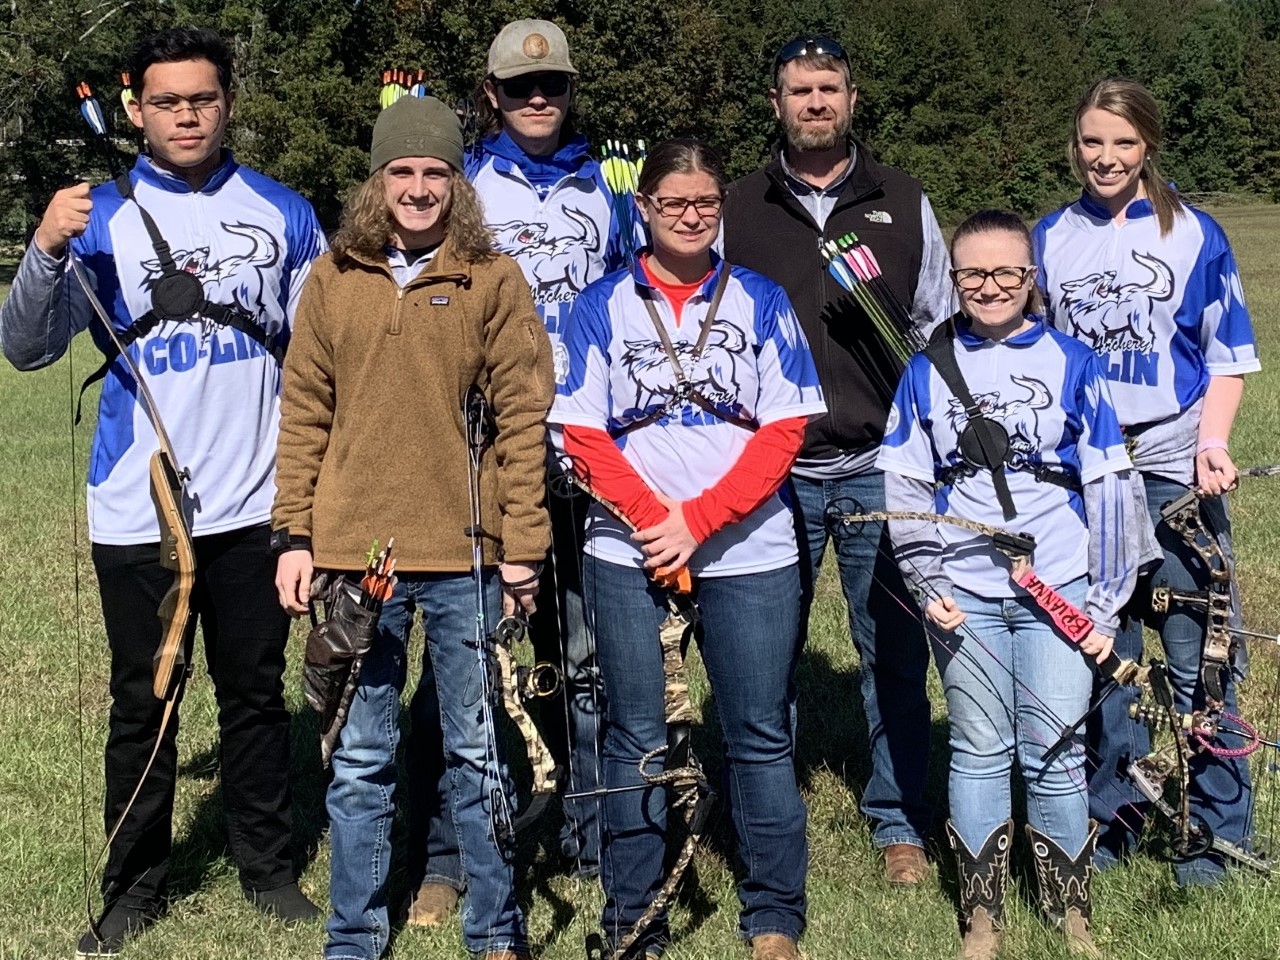 Simpson County archers compete in state championships